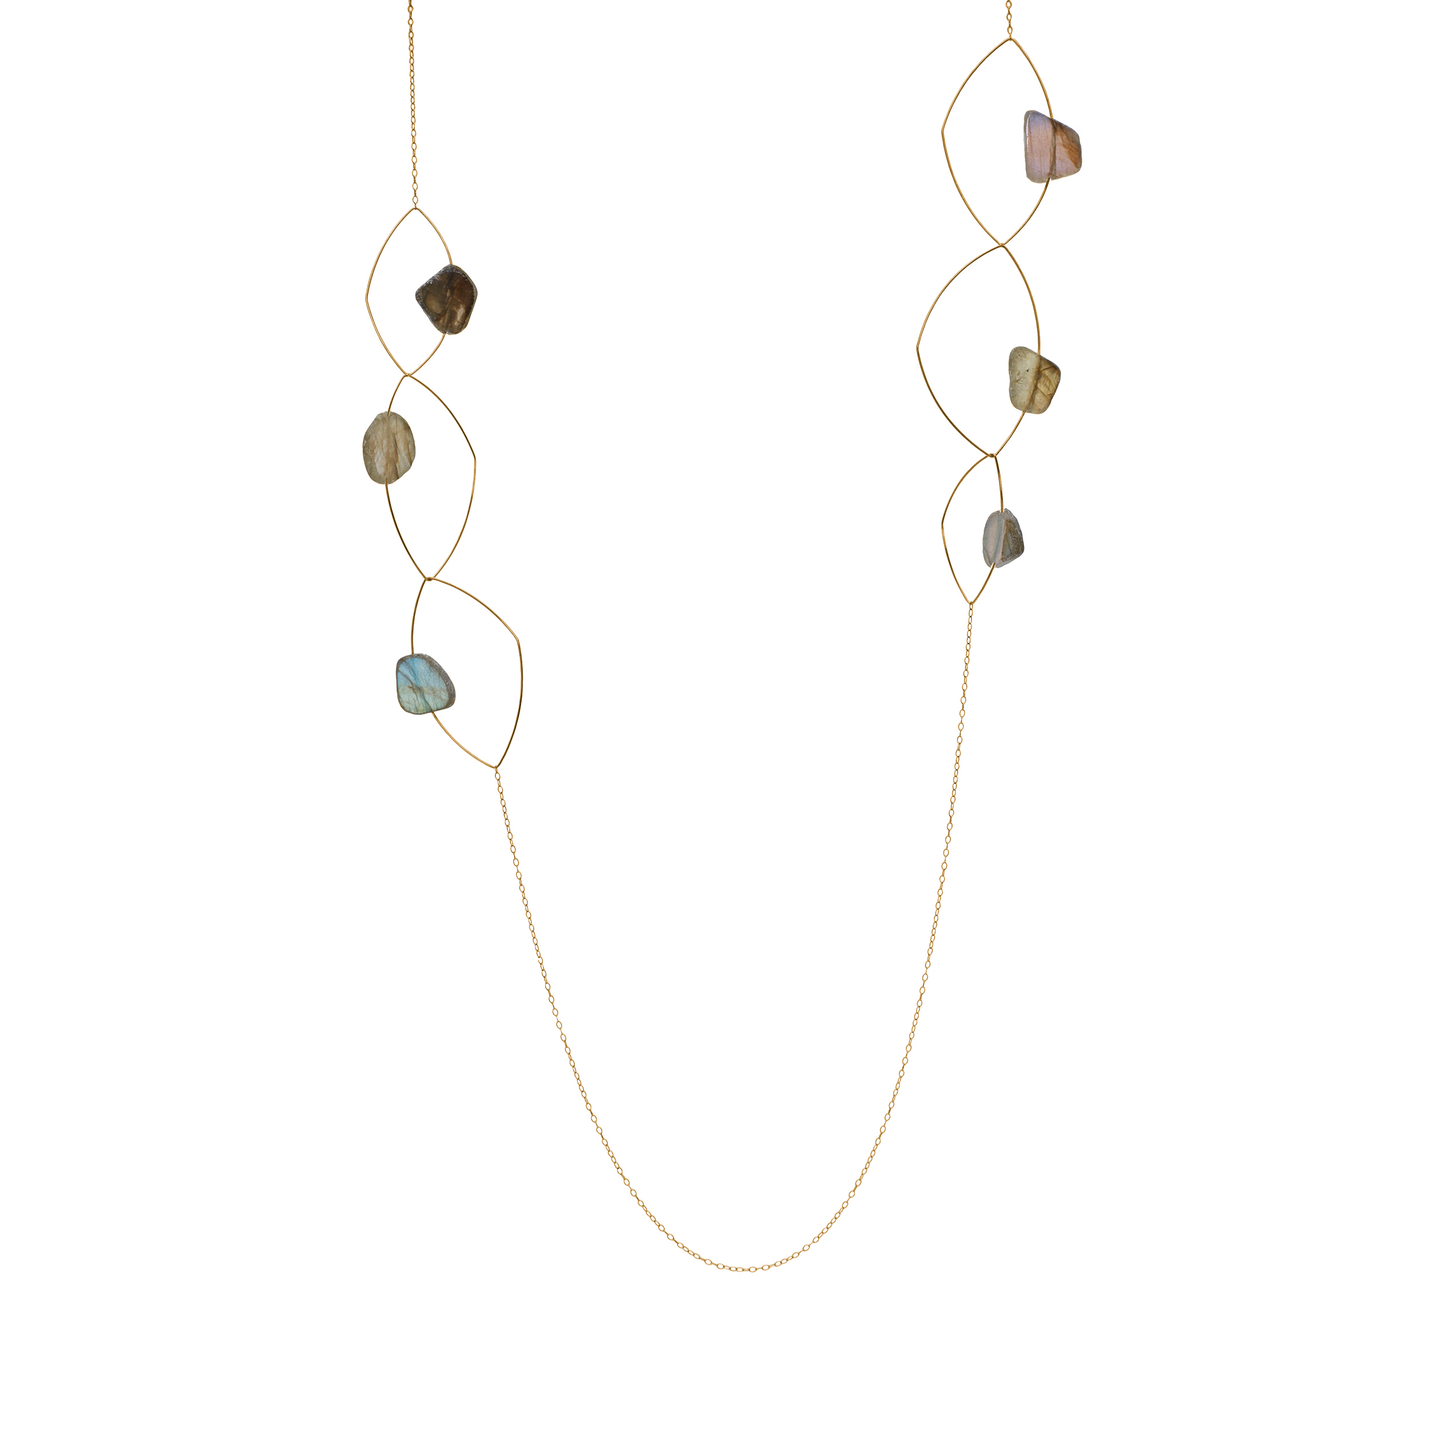 Long 'Morph It!' Necklace with Sliced Gemstones